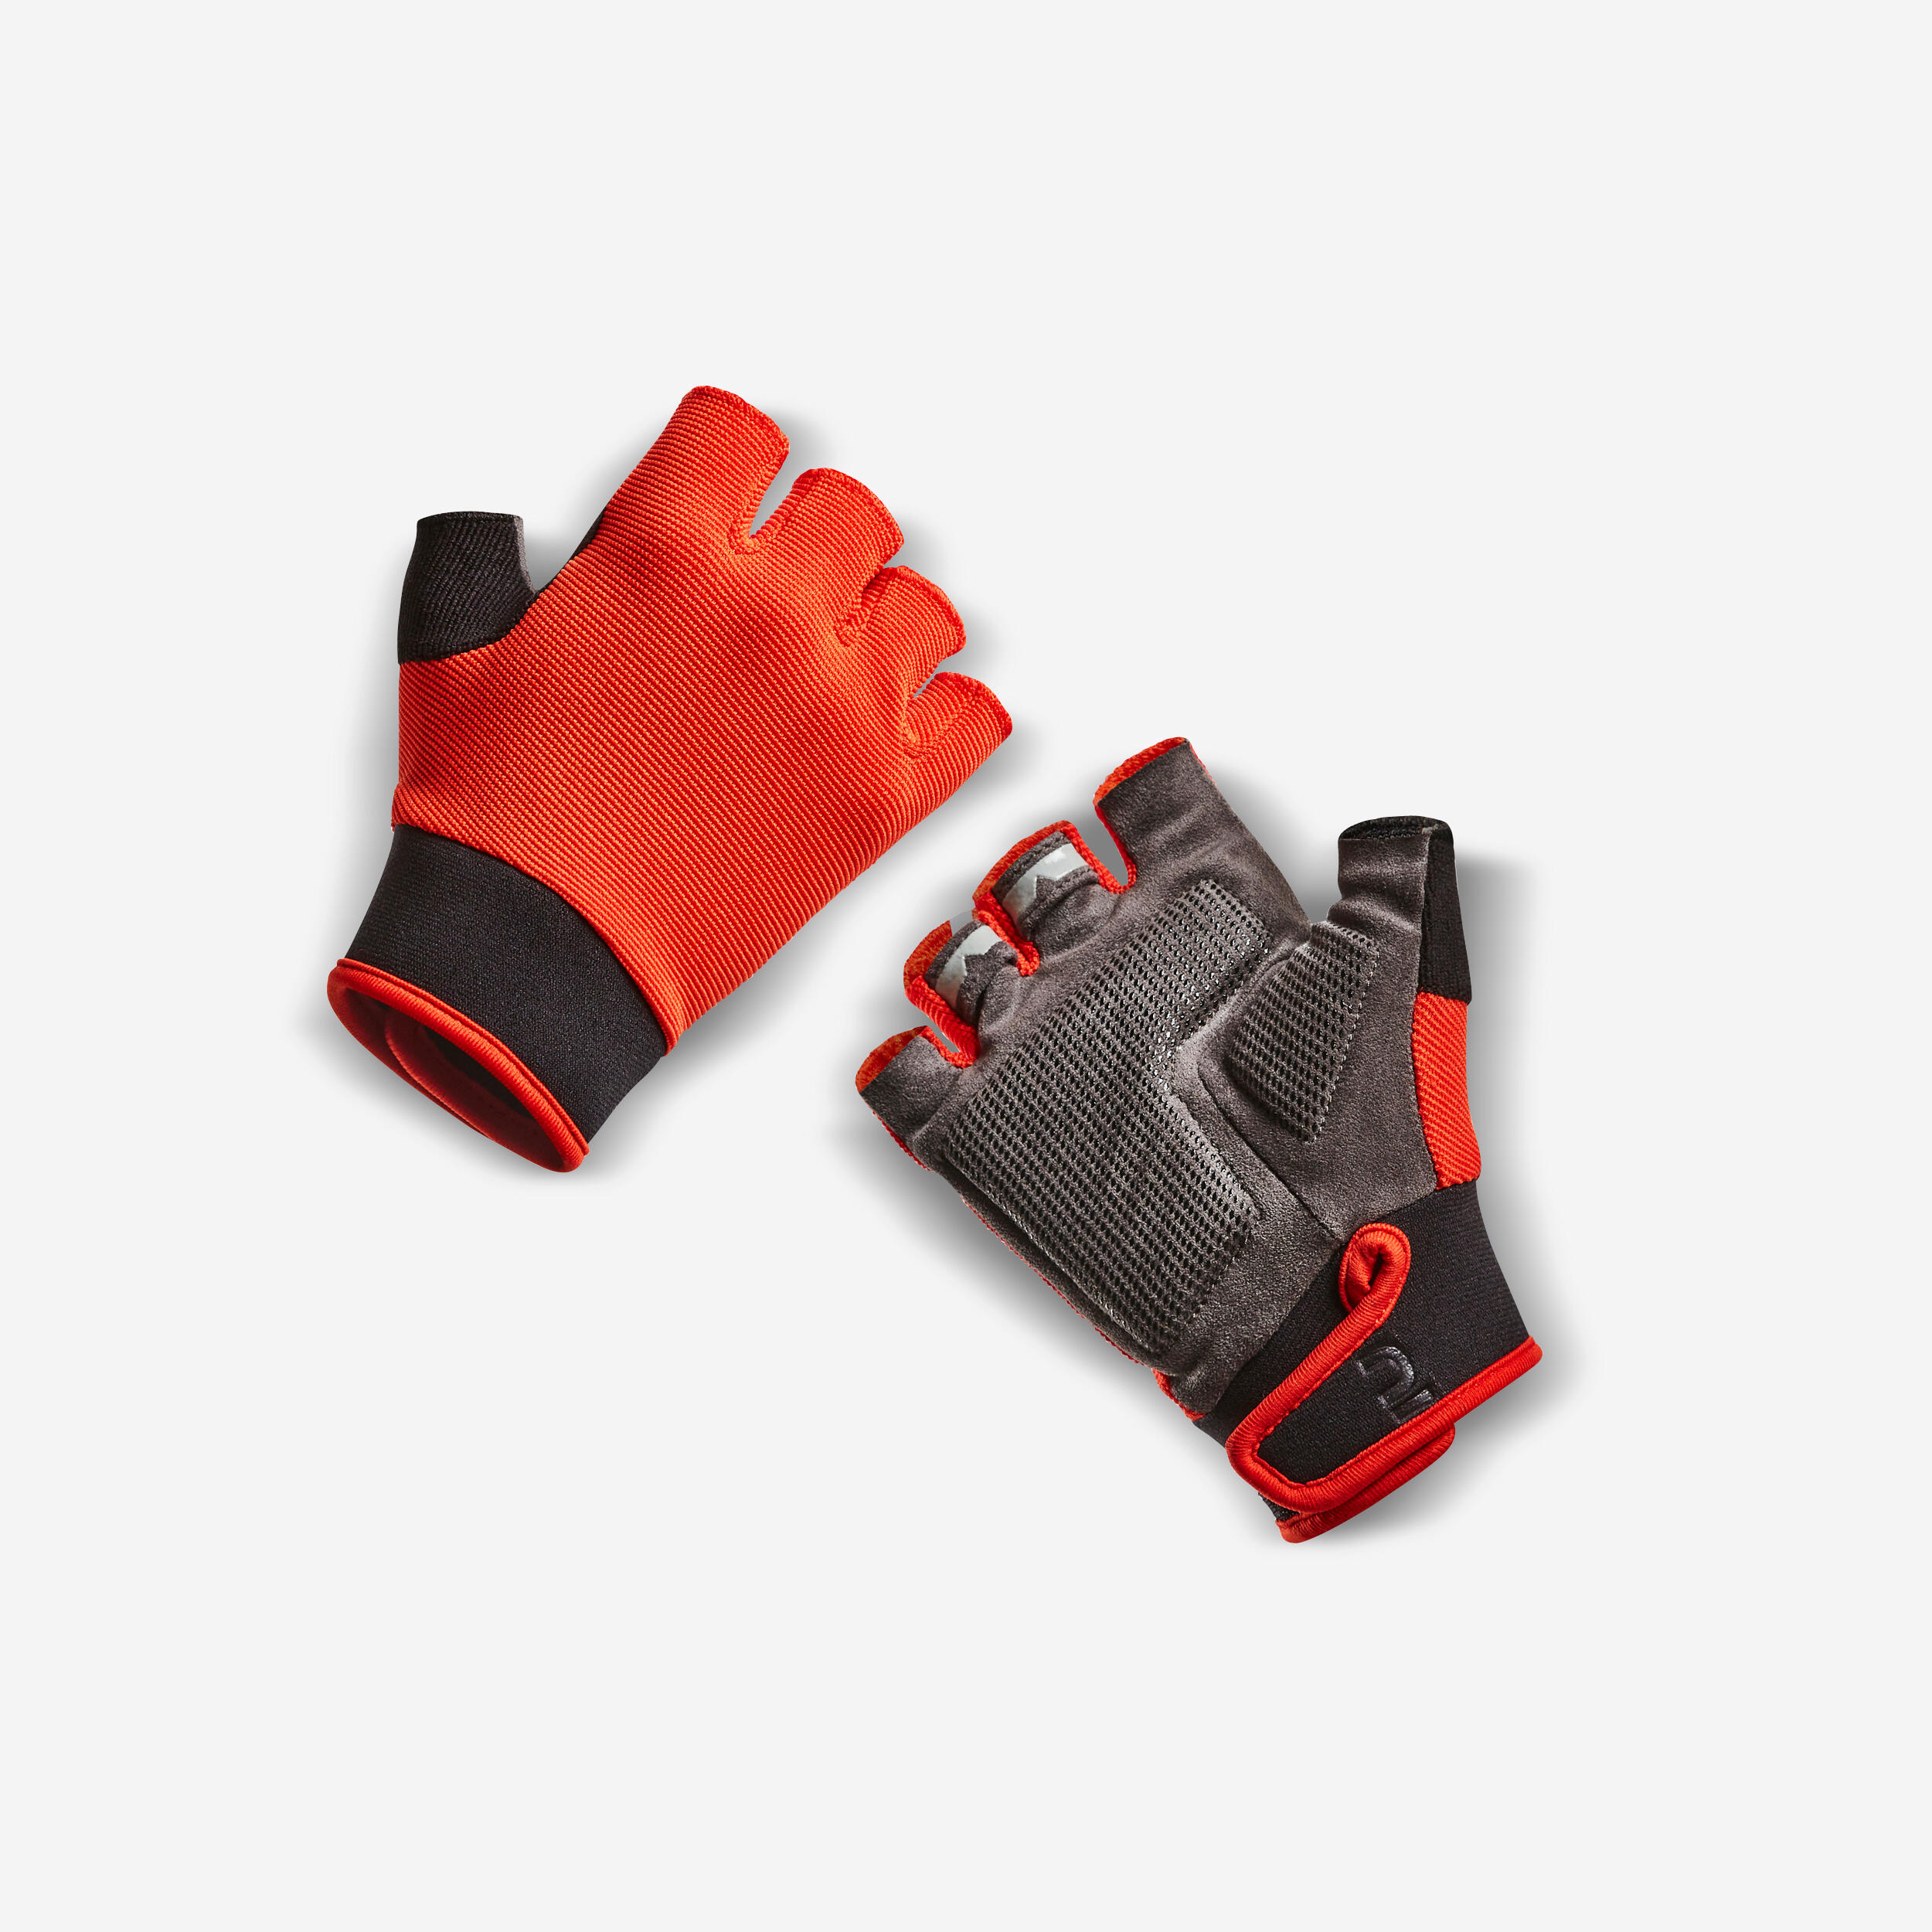 BTWIN Kids' Cycling Gloves 500 - Black / Red